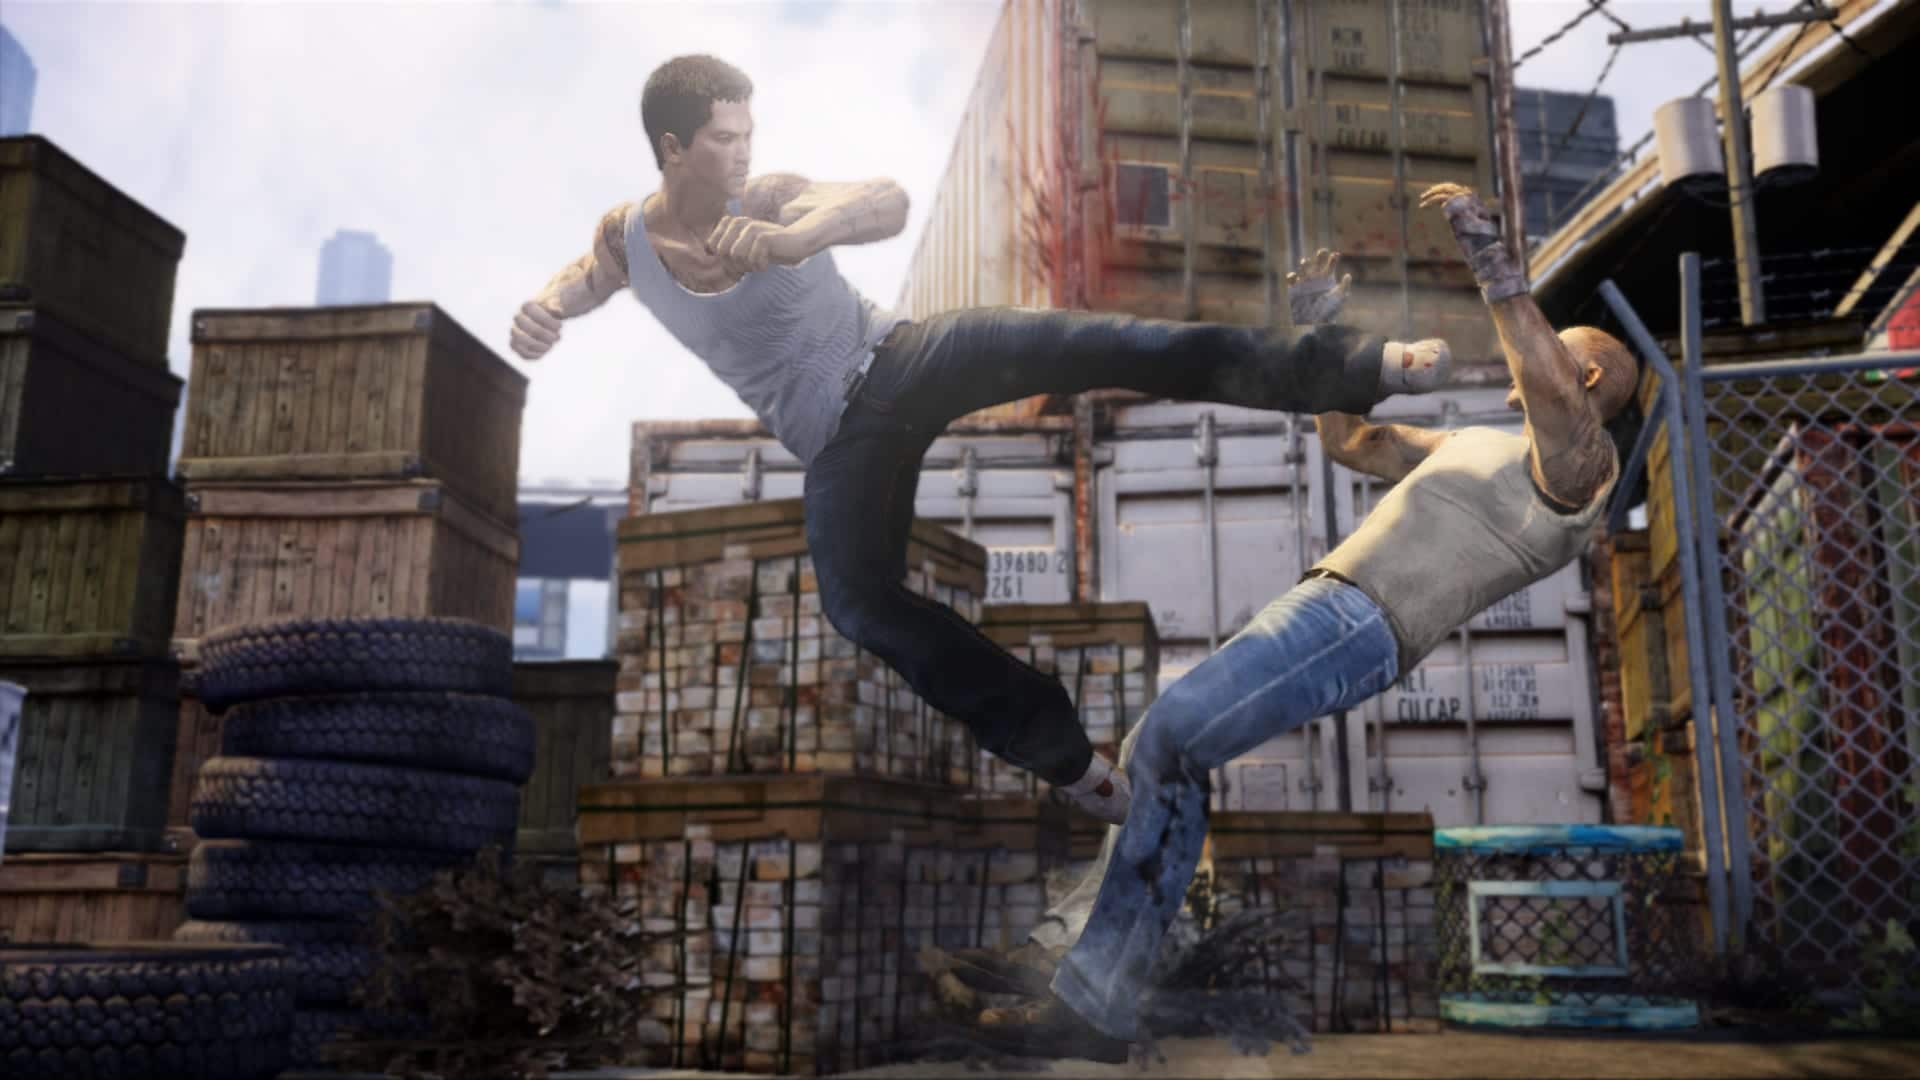 Sleeping Dogs - review, Games